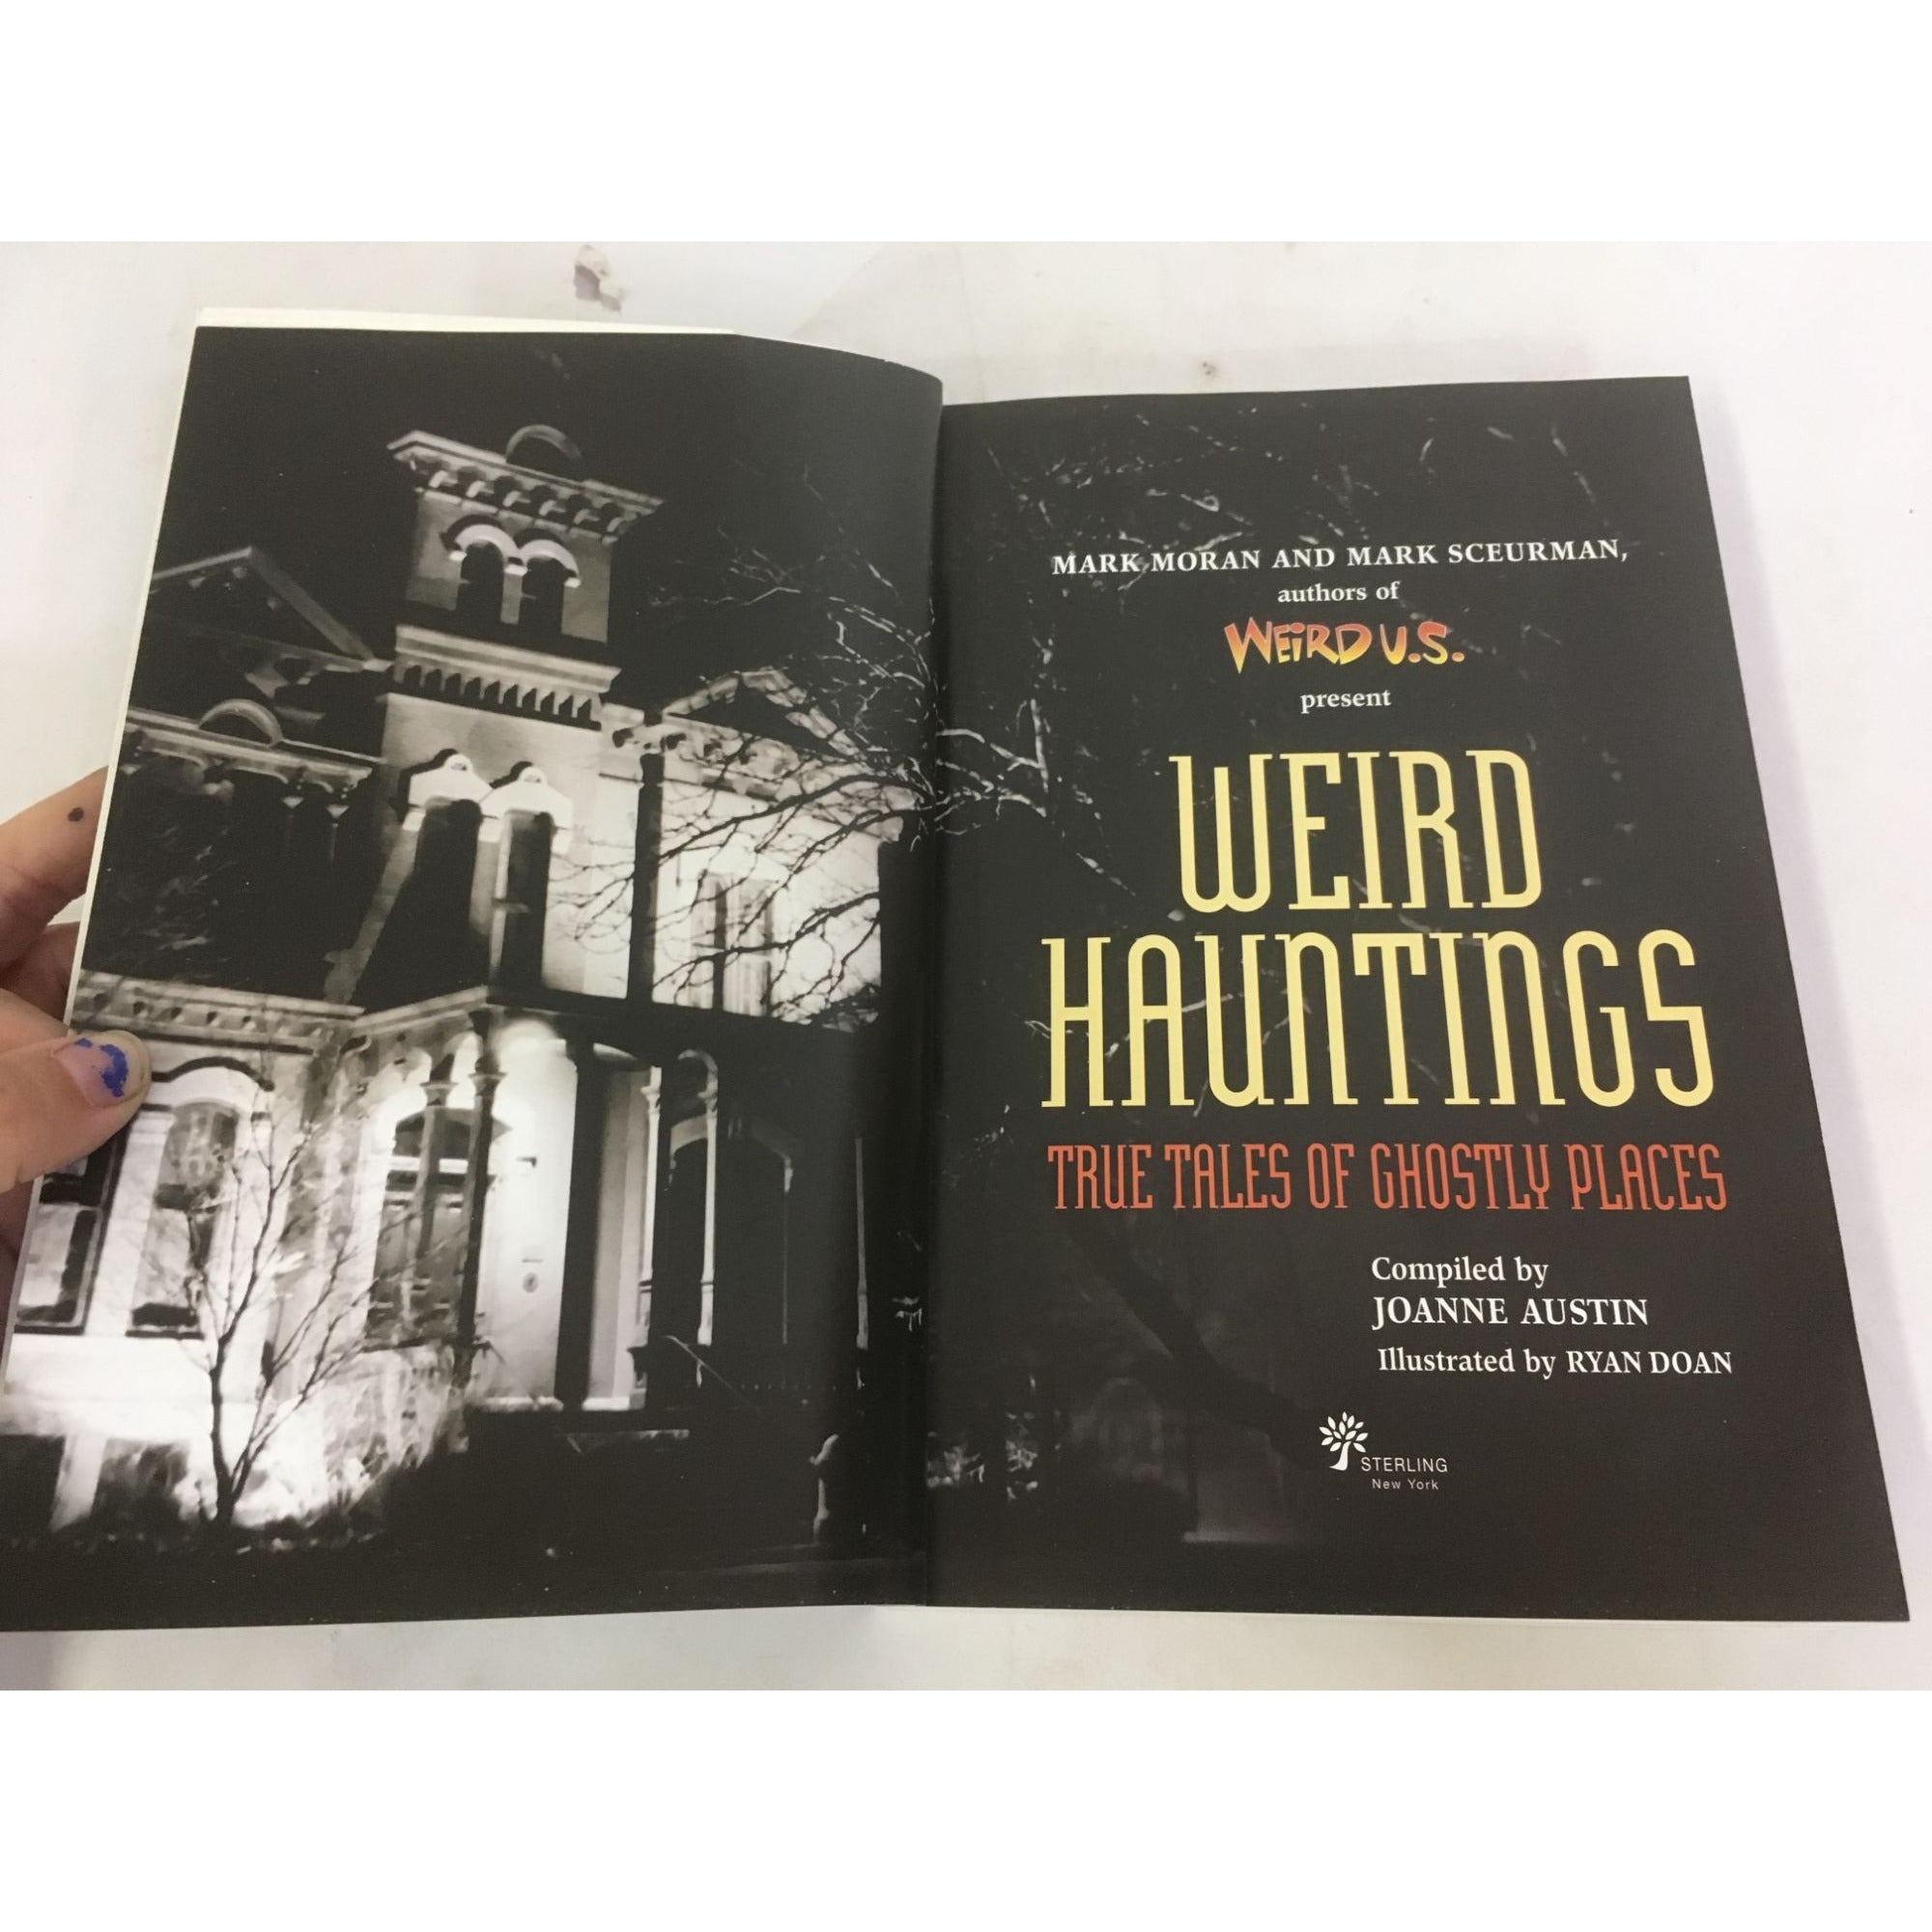 Weird Hauntings: True Tales of Ghostly Places book by Joanne Austin